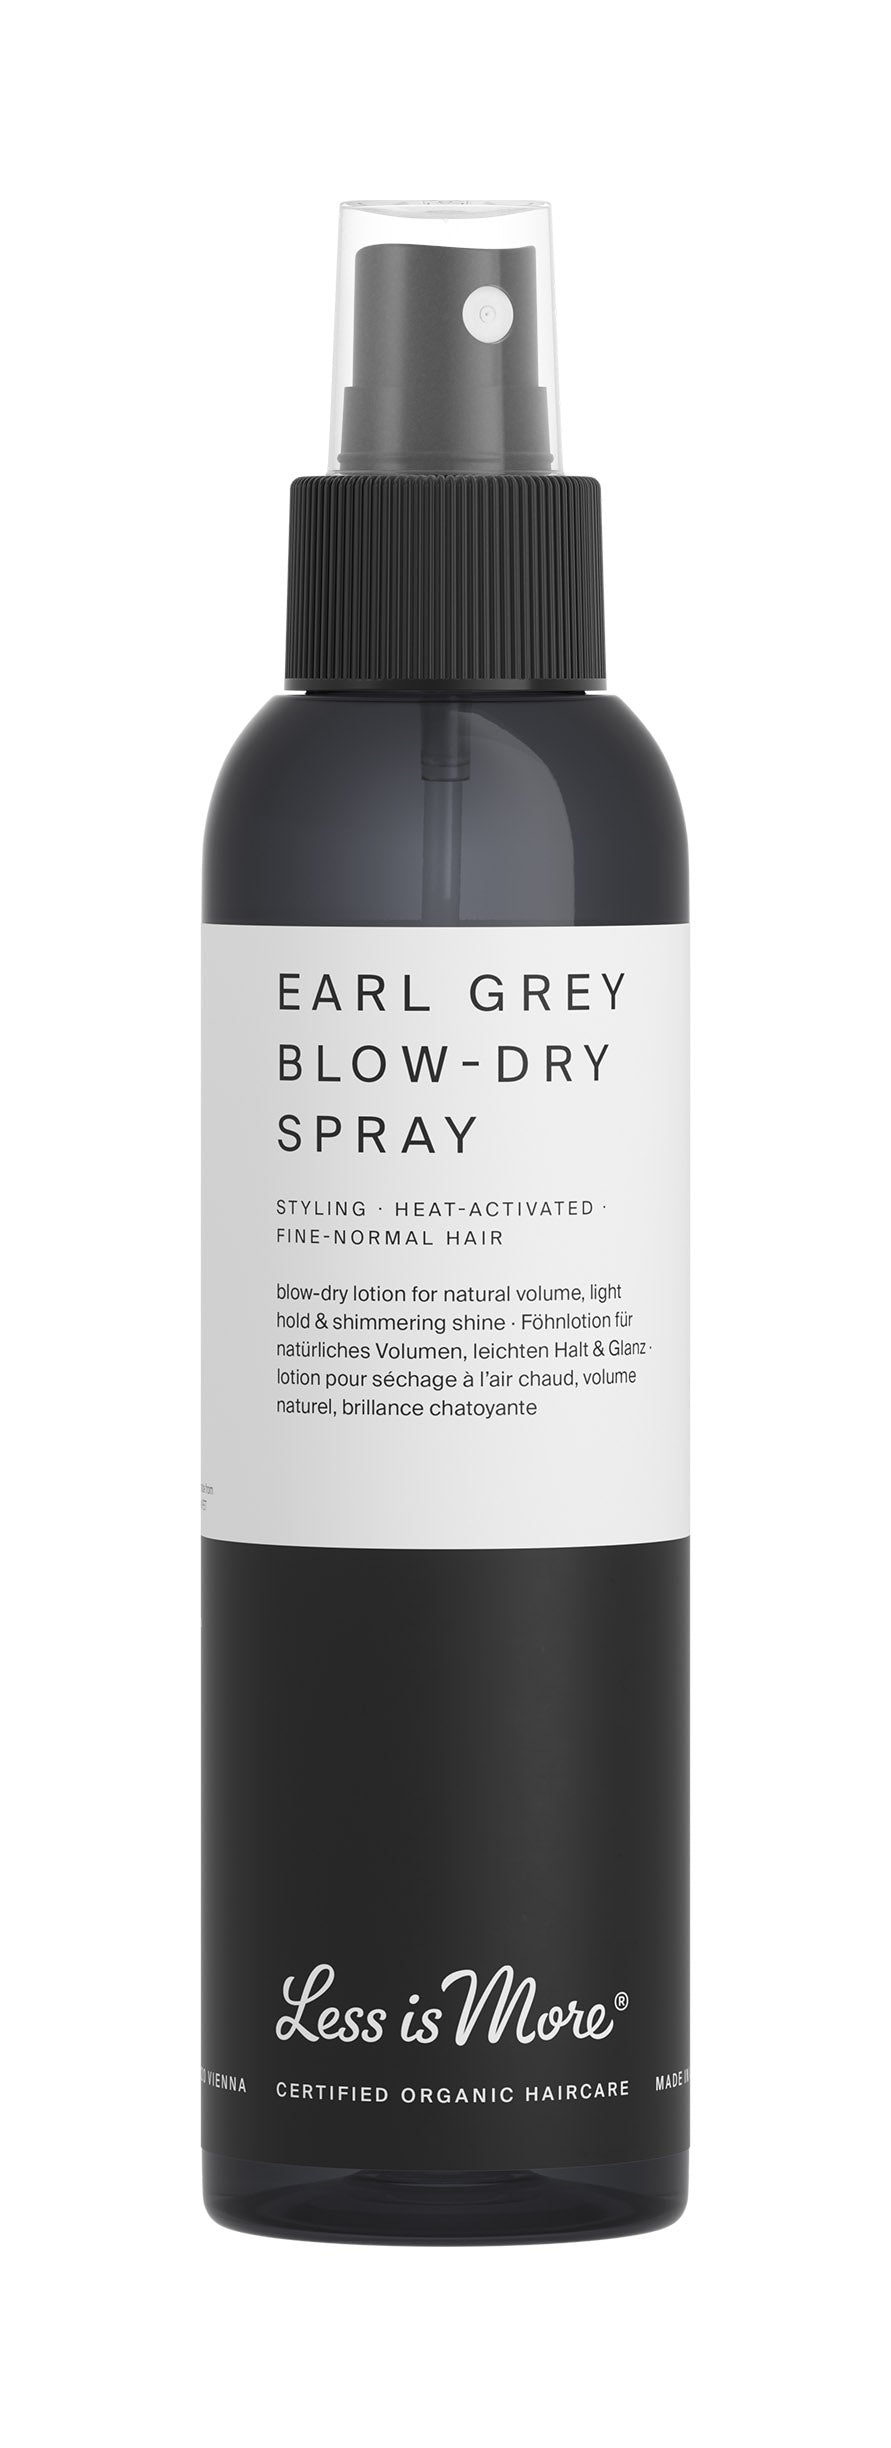 Less is More - Earl Grey Blow-Dry Spray 150ml